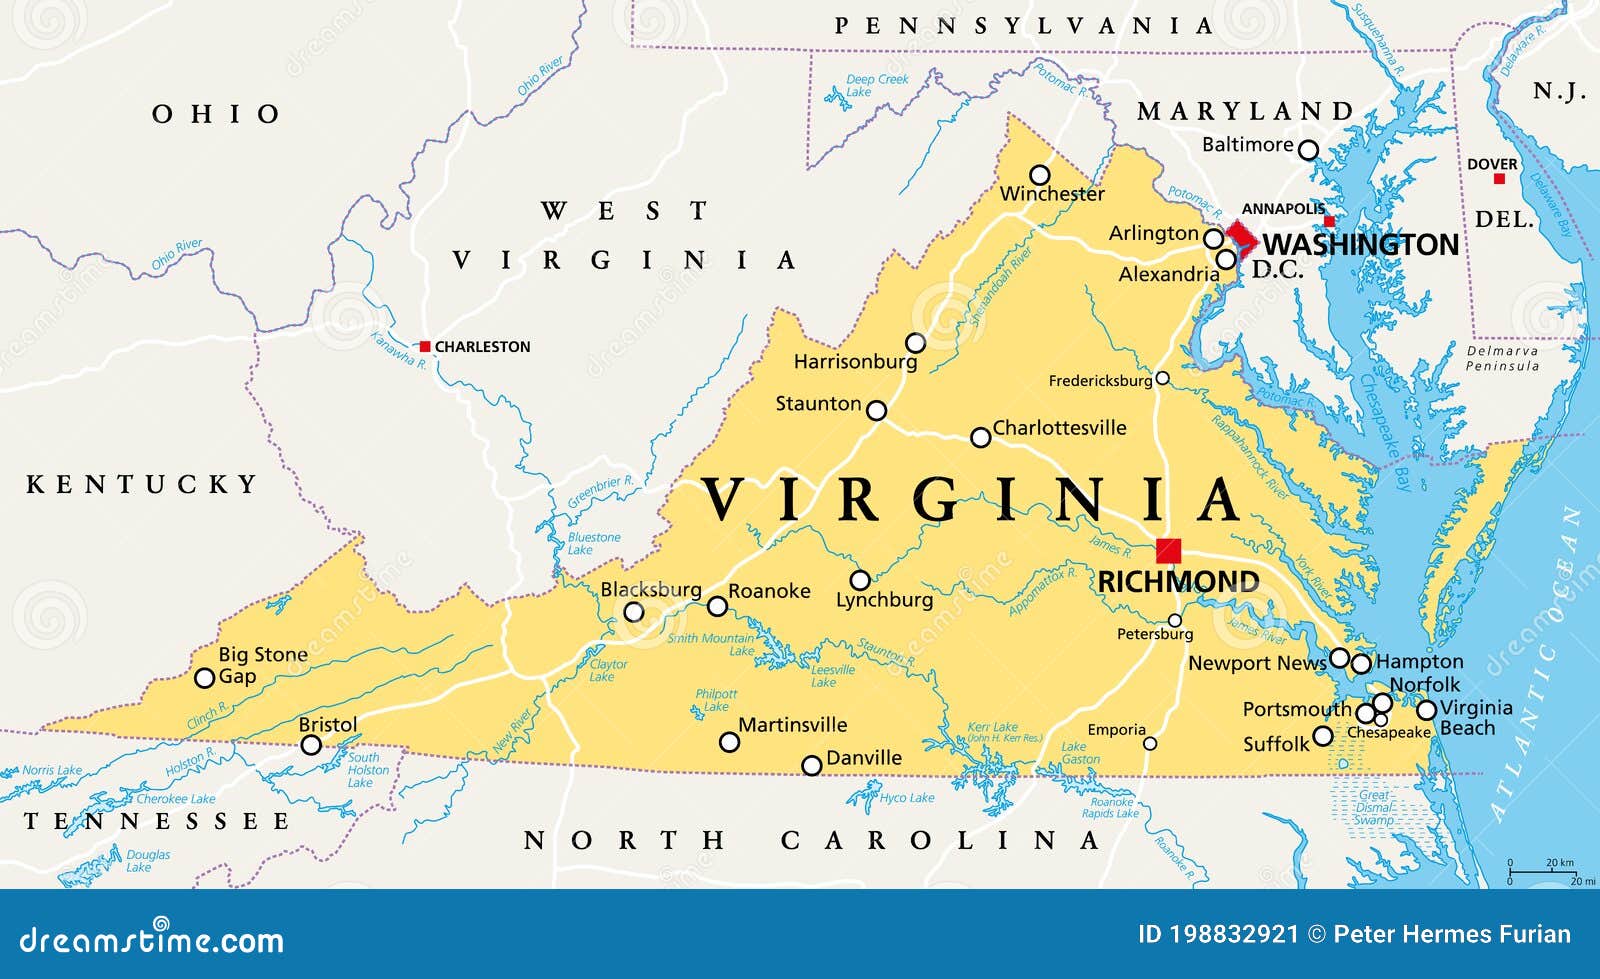 virginia, va, political map, old dominion, mother of presidents